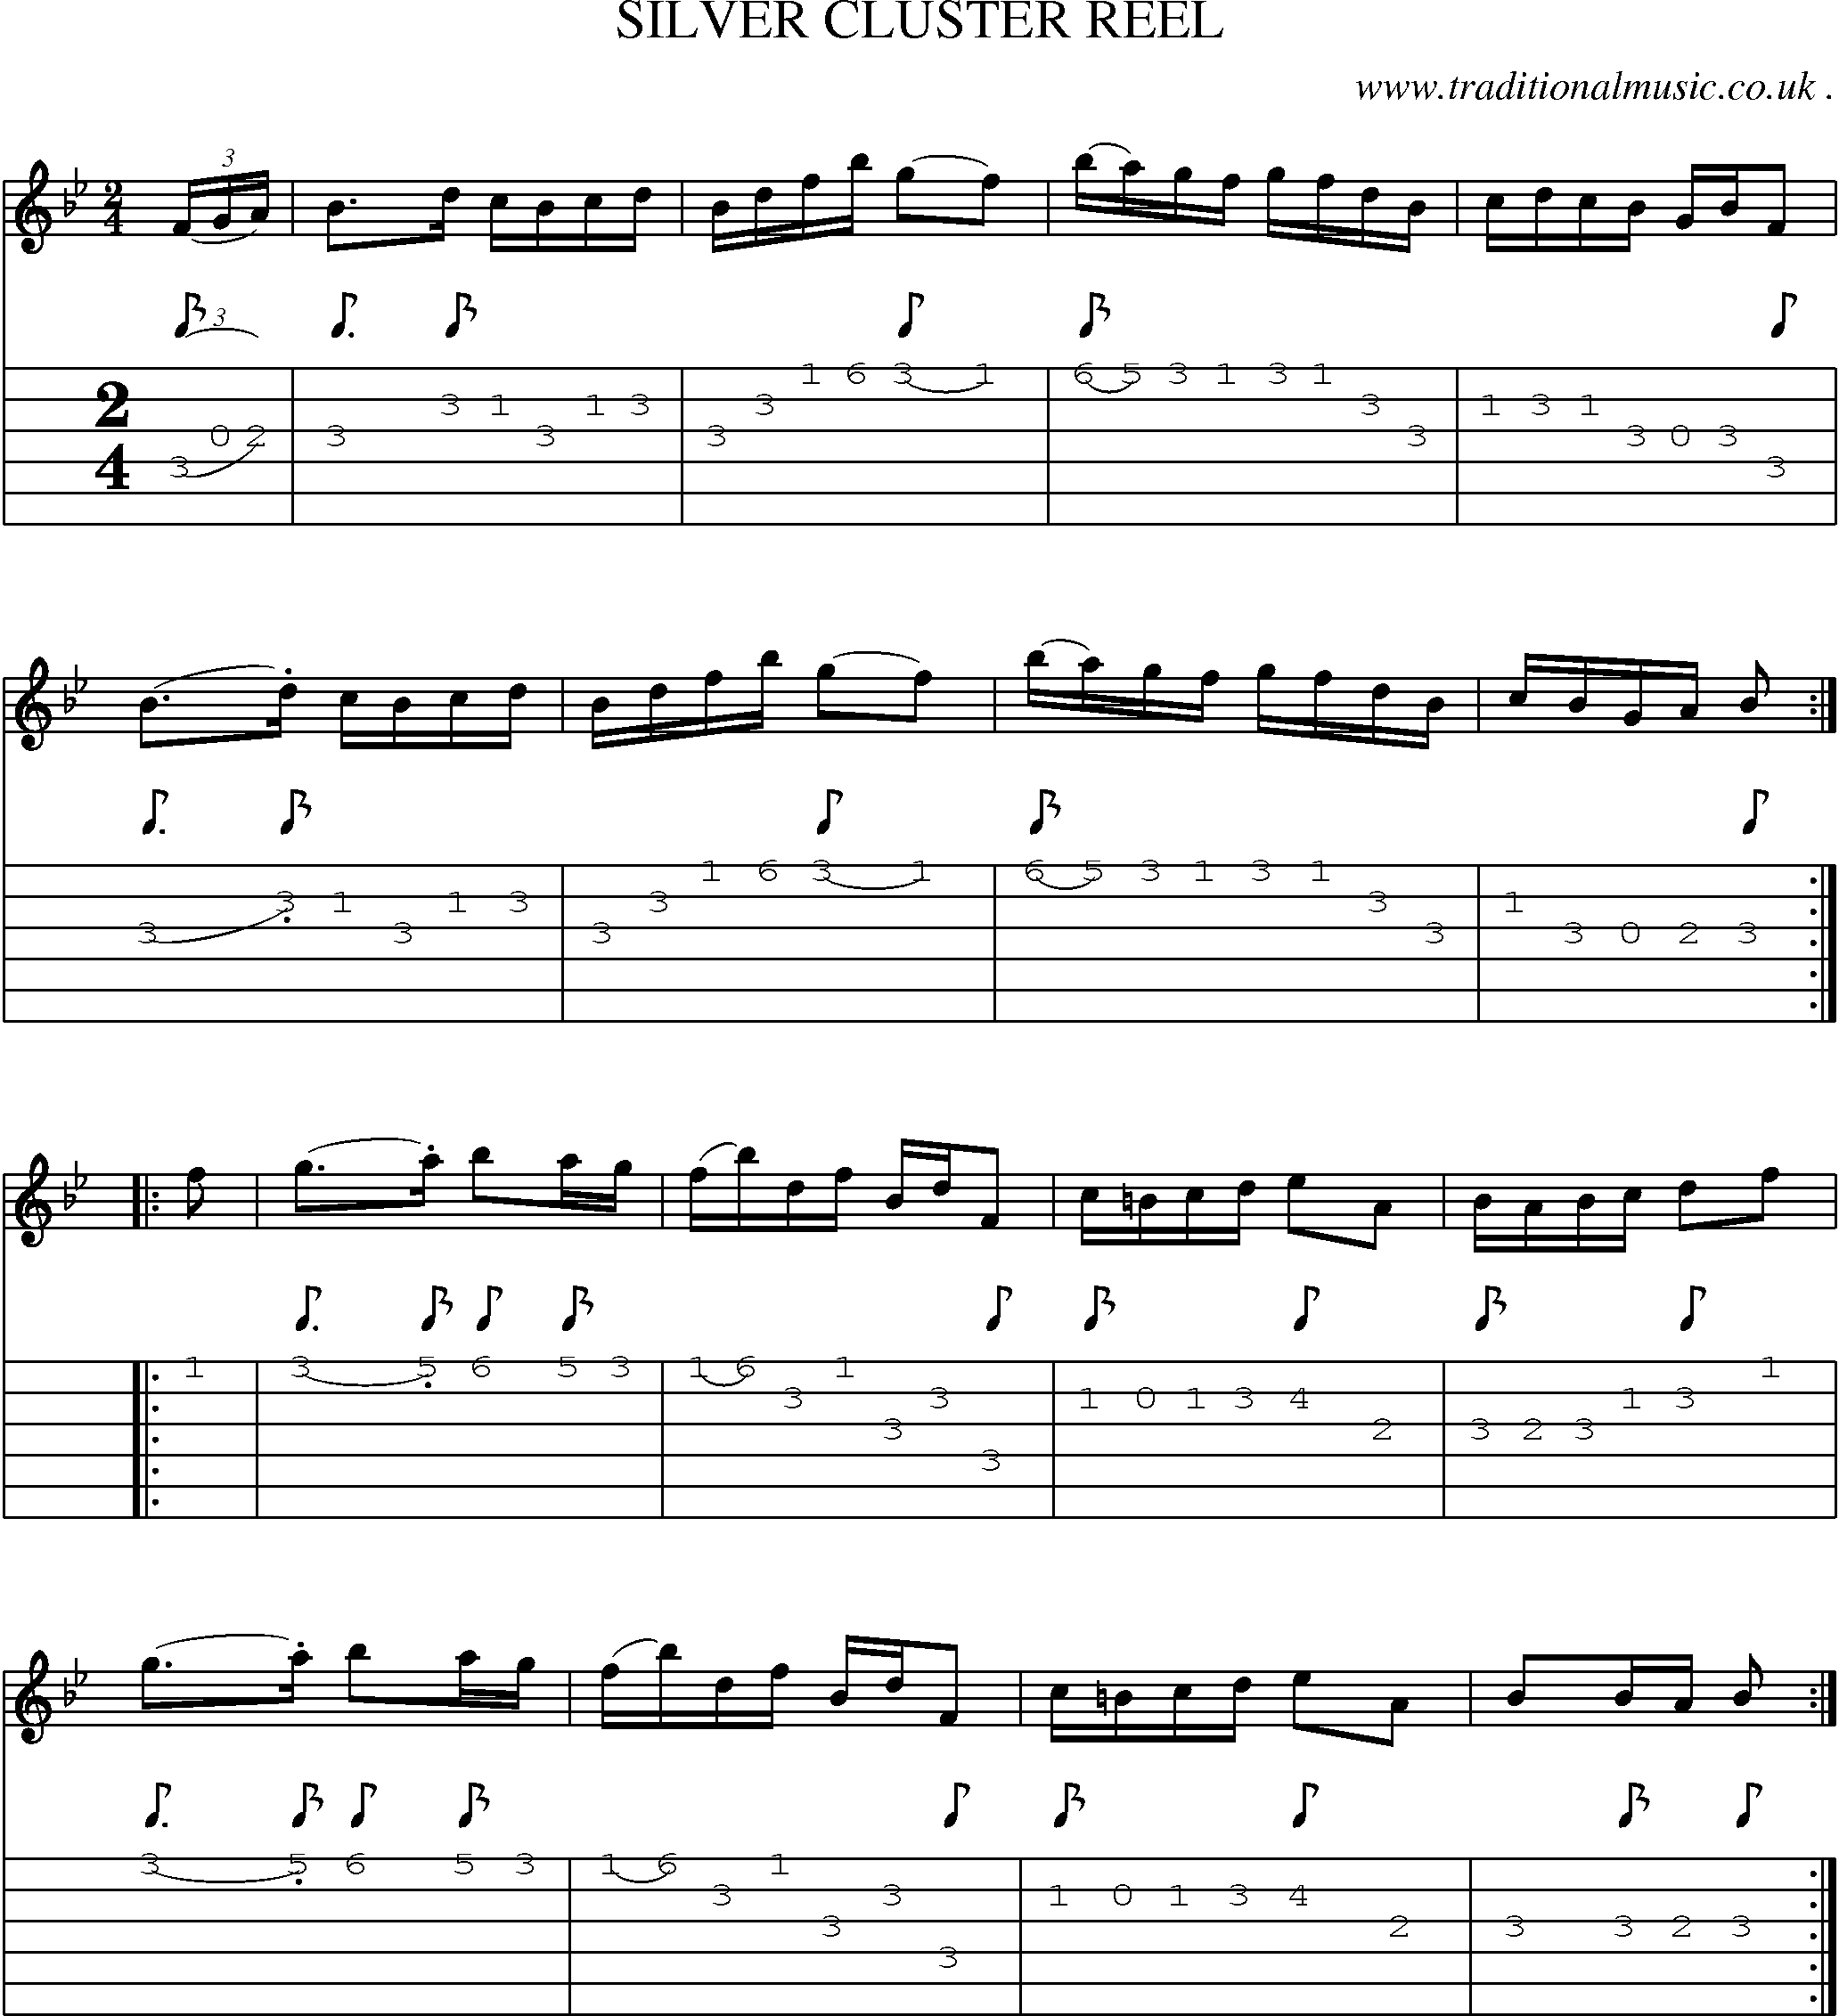 Sheet-Music and Guitar Tabs for Silver Cluster Reel